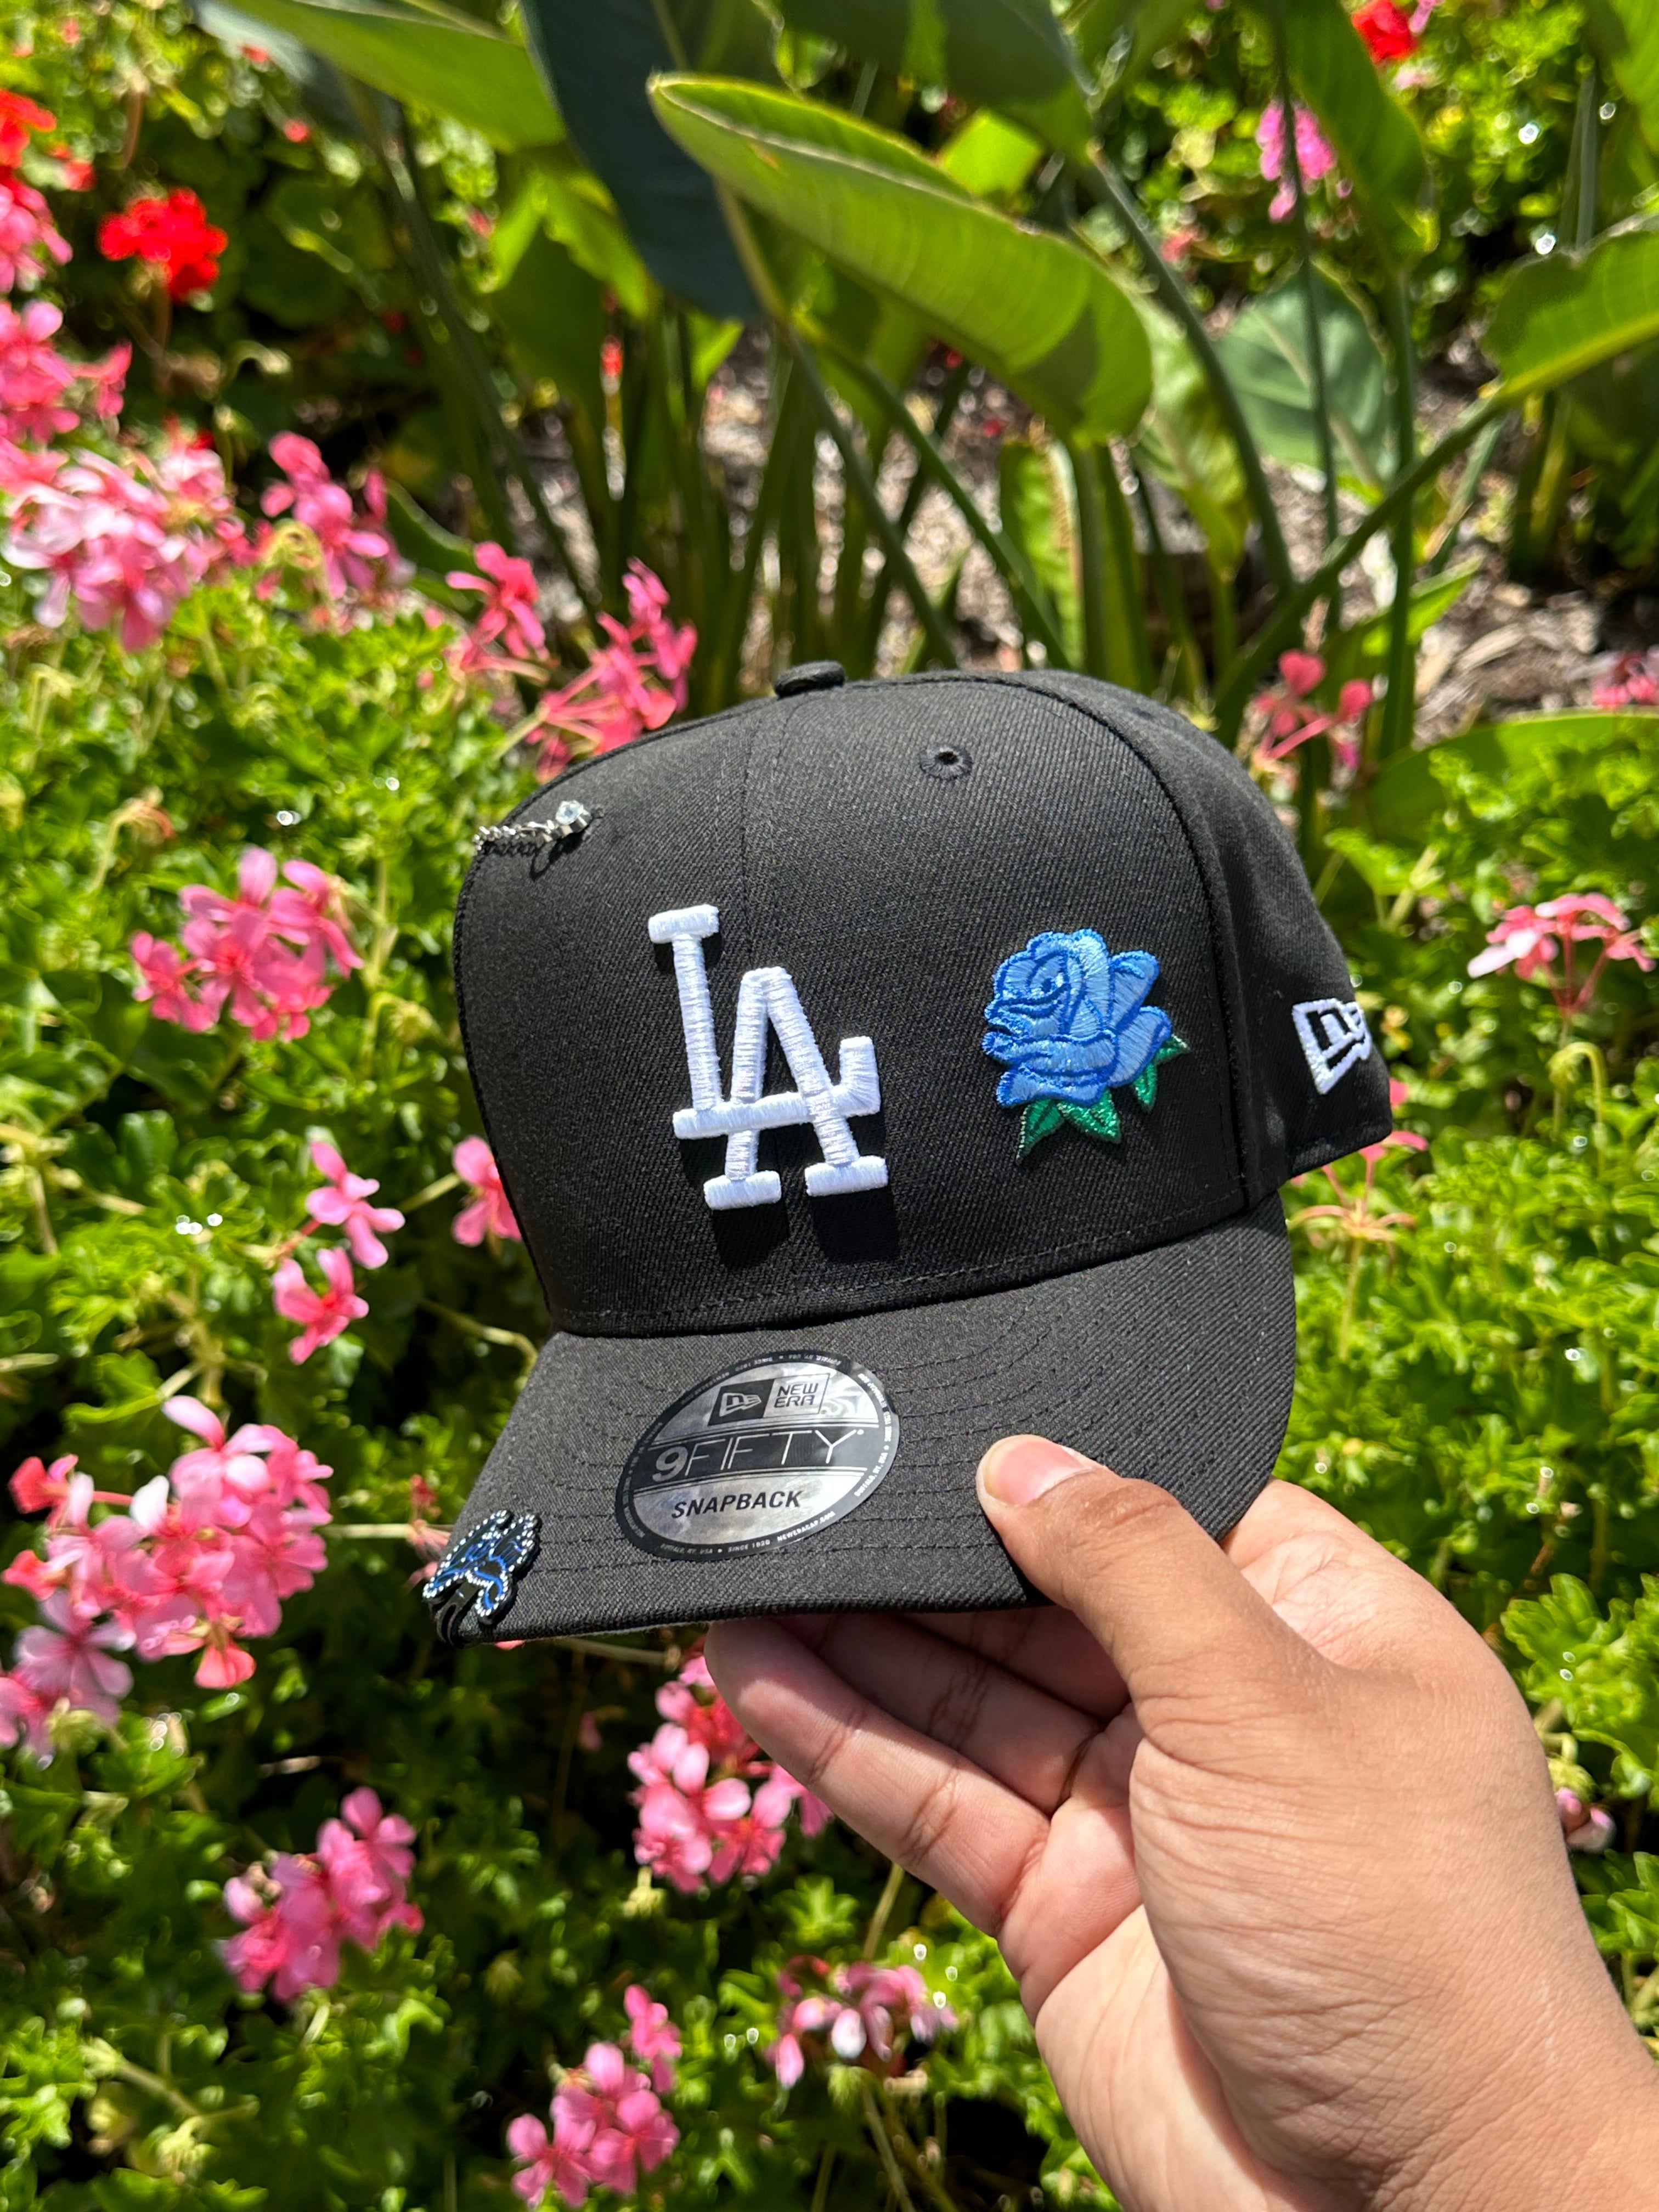 NEW ERA EXCLUSIVE 9FIFTY BLACK LOS ANGELES DODGERS SNAPBACK W/ BLUE ROSE + 75TH WORLD SERIES PATCH